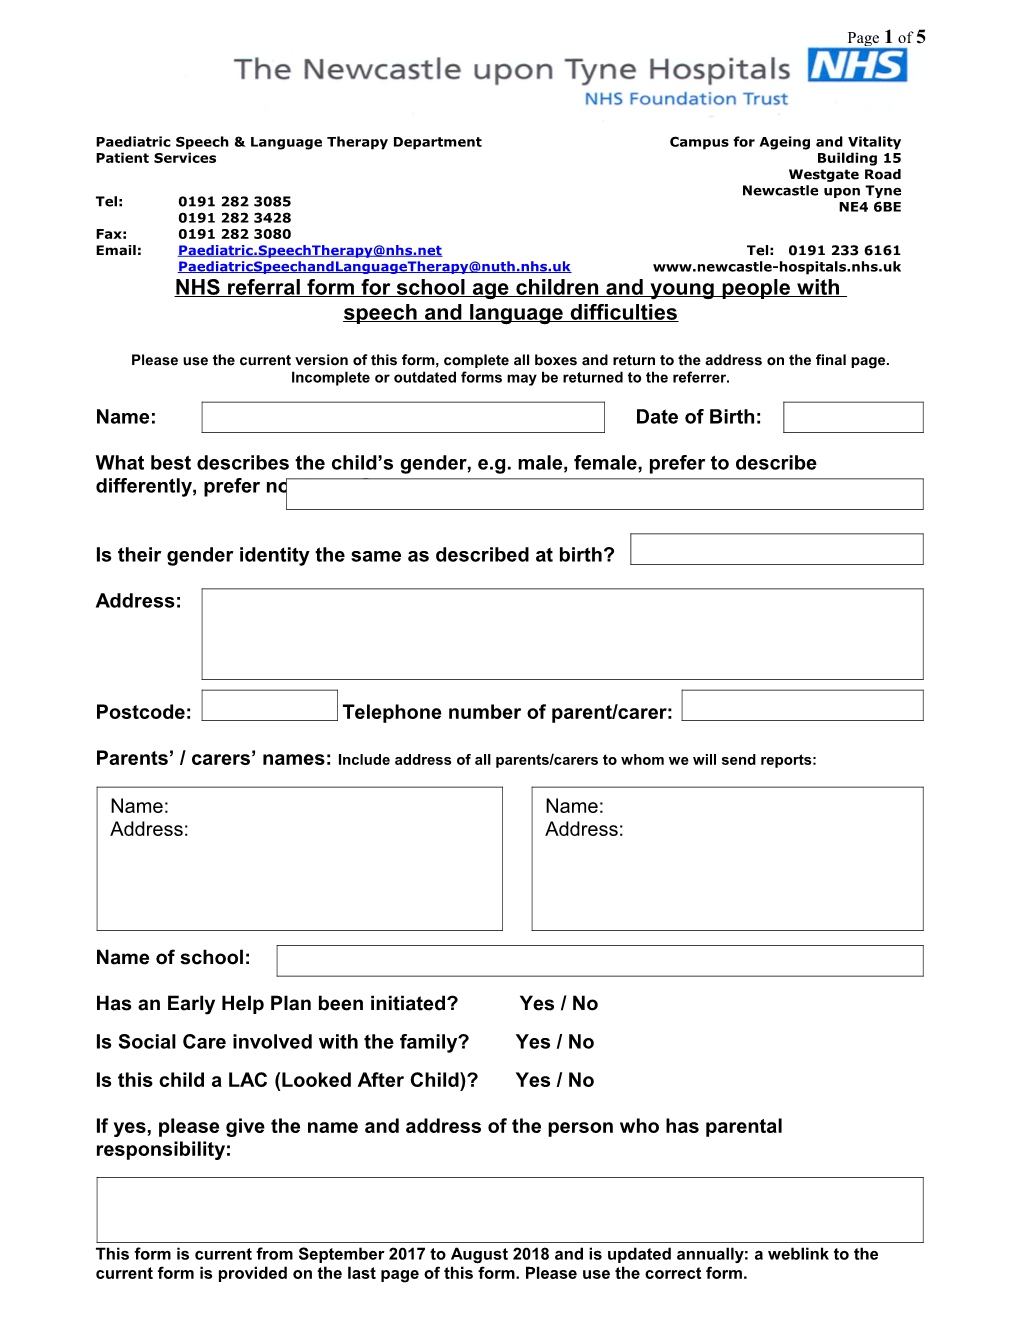 NHS Referral Form for School Age Children and Young People With